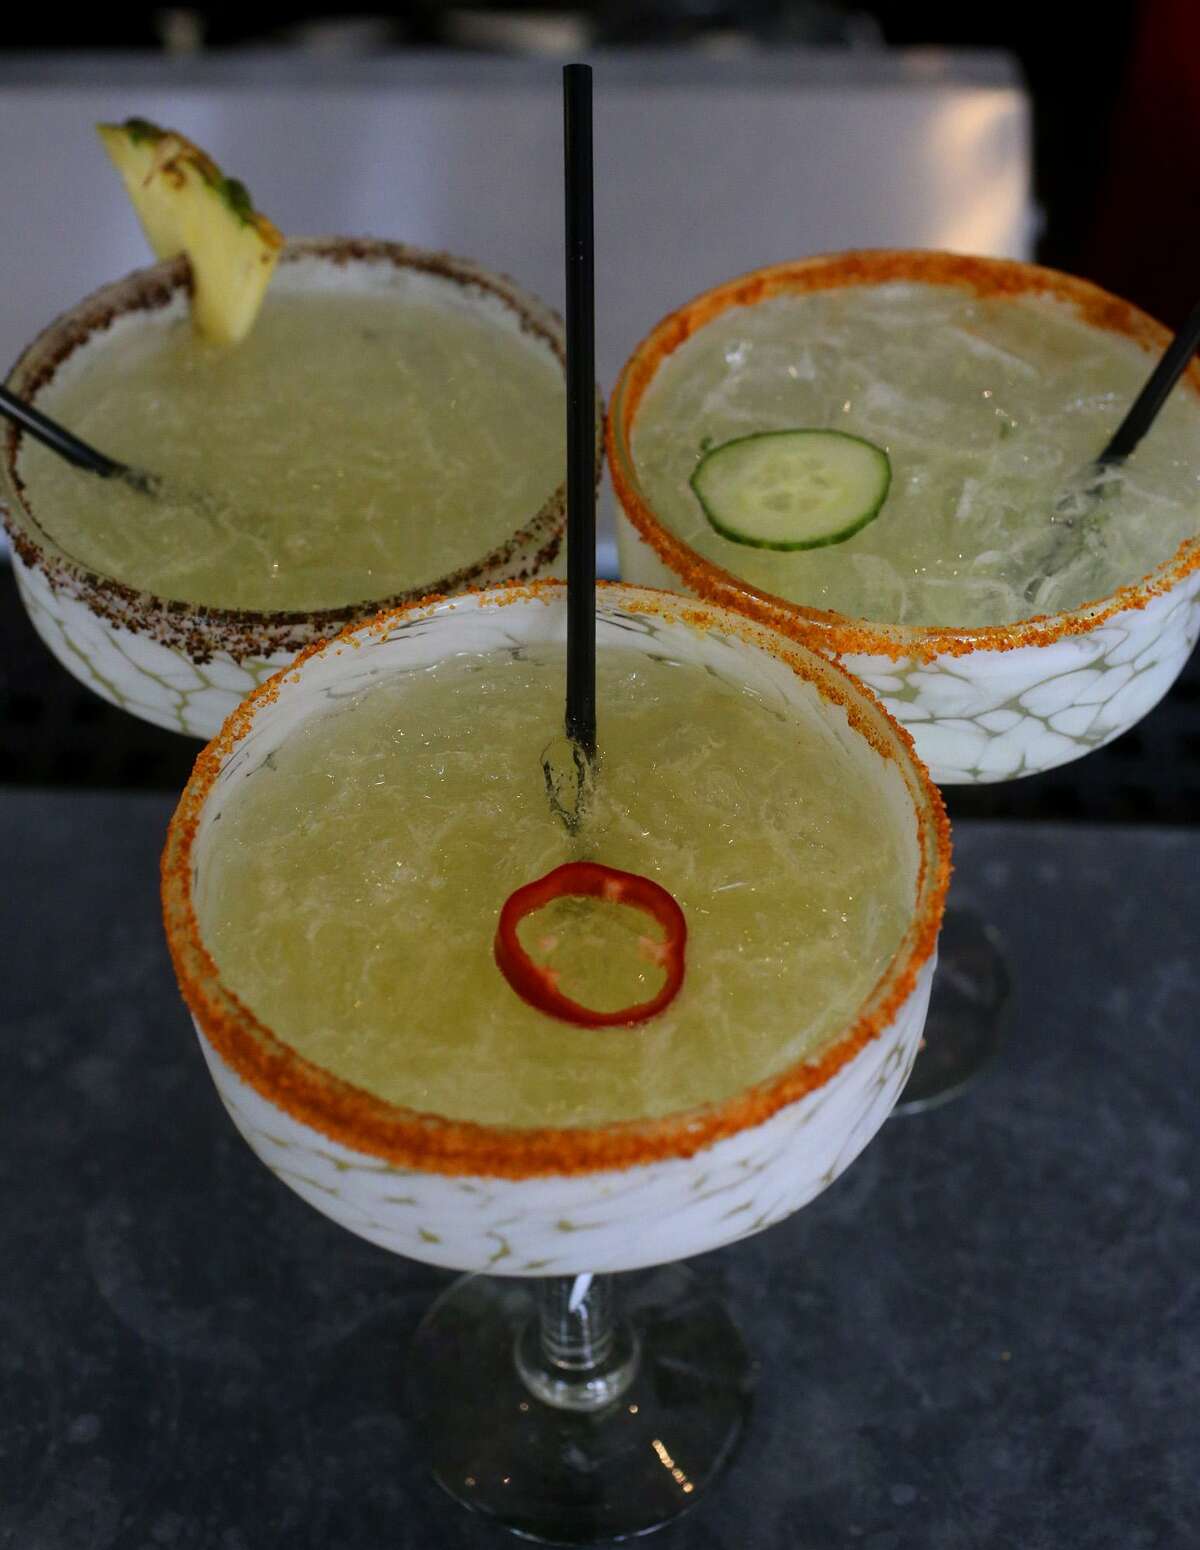 Drinks made from infused spirits at The Frutería-Botanero on South Flores Street include the "pepino" margarita (top, right) with a cucumber infusion, the gin drink infused with fresno pepper and orange skin (center, bottom) and the Piña Mezcal infused with orange and pineapple (top, left).